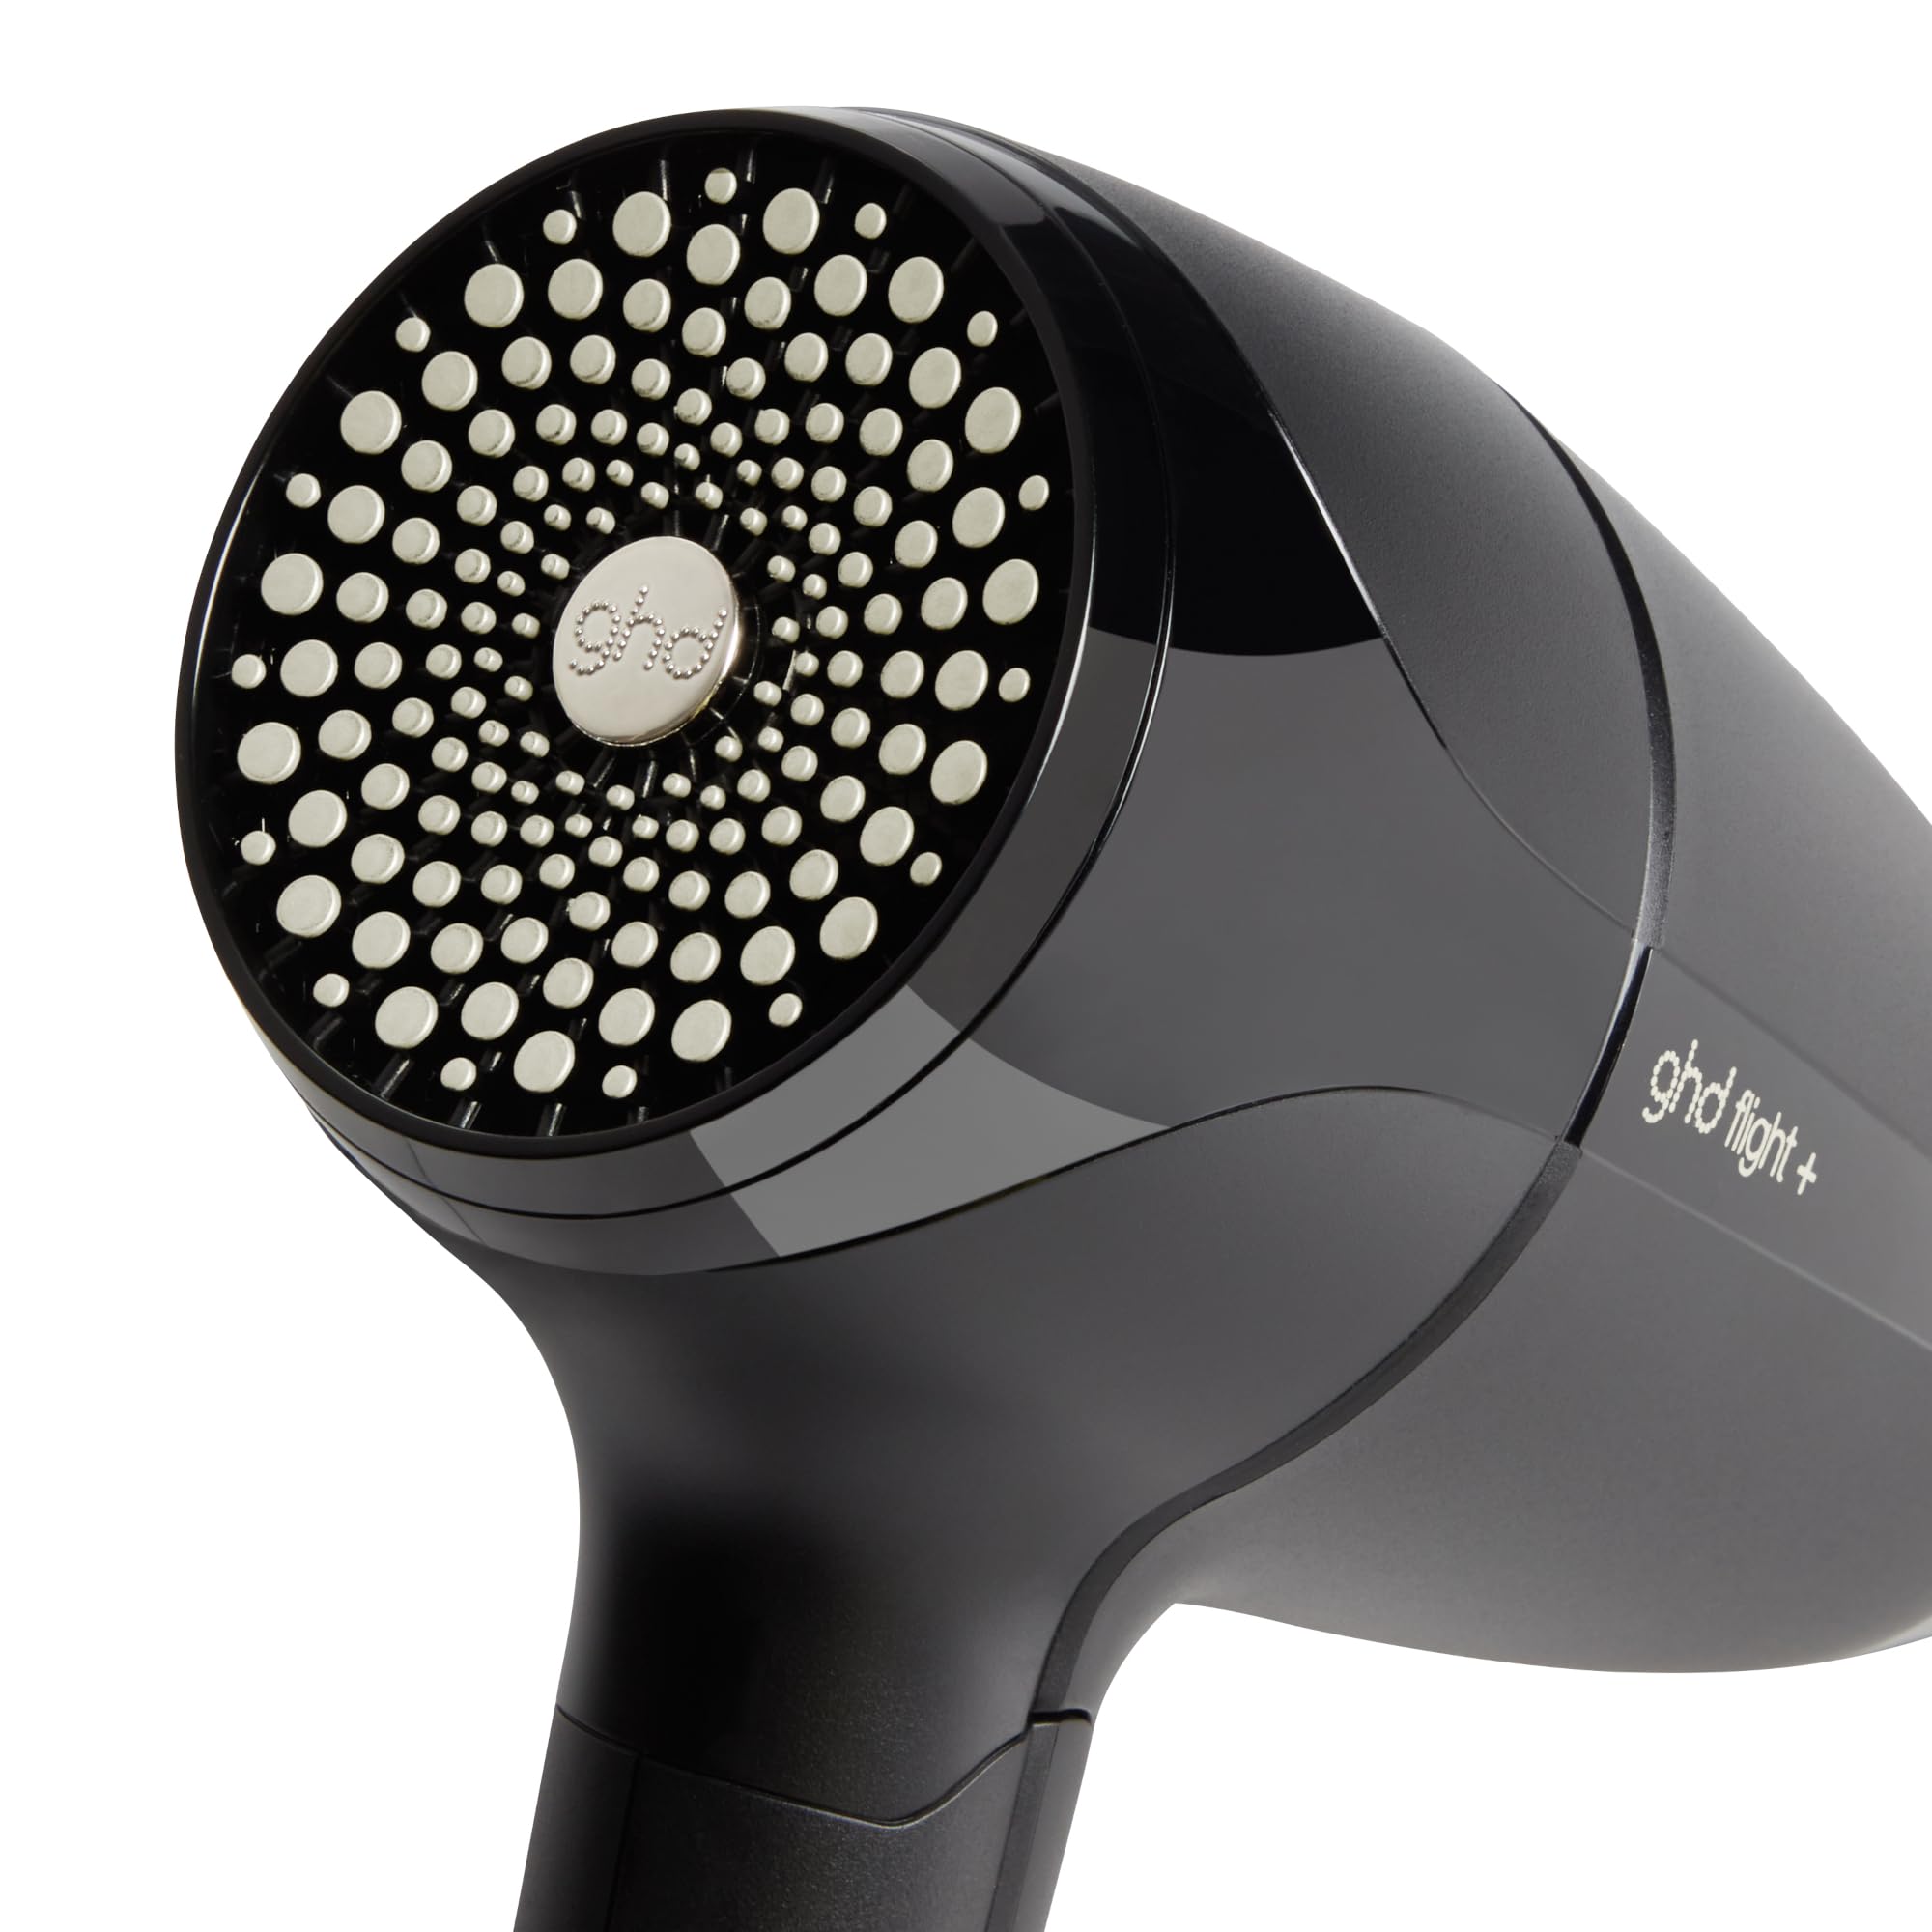 Ghd Flight+ Travel Hair Dryer ― 1300w Professional Portable Hair Volumizer, Suitcase Friendly, Lightweight, Powerful, and Compact Blow Dryer with Luxurious Travel Case